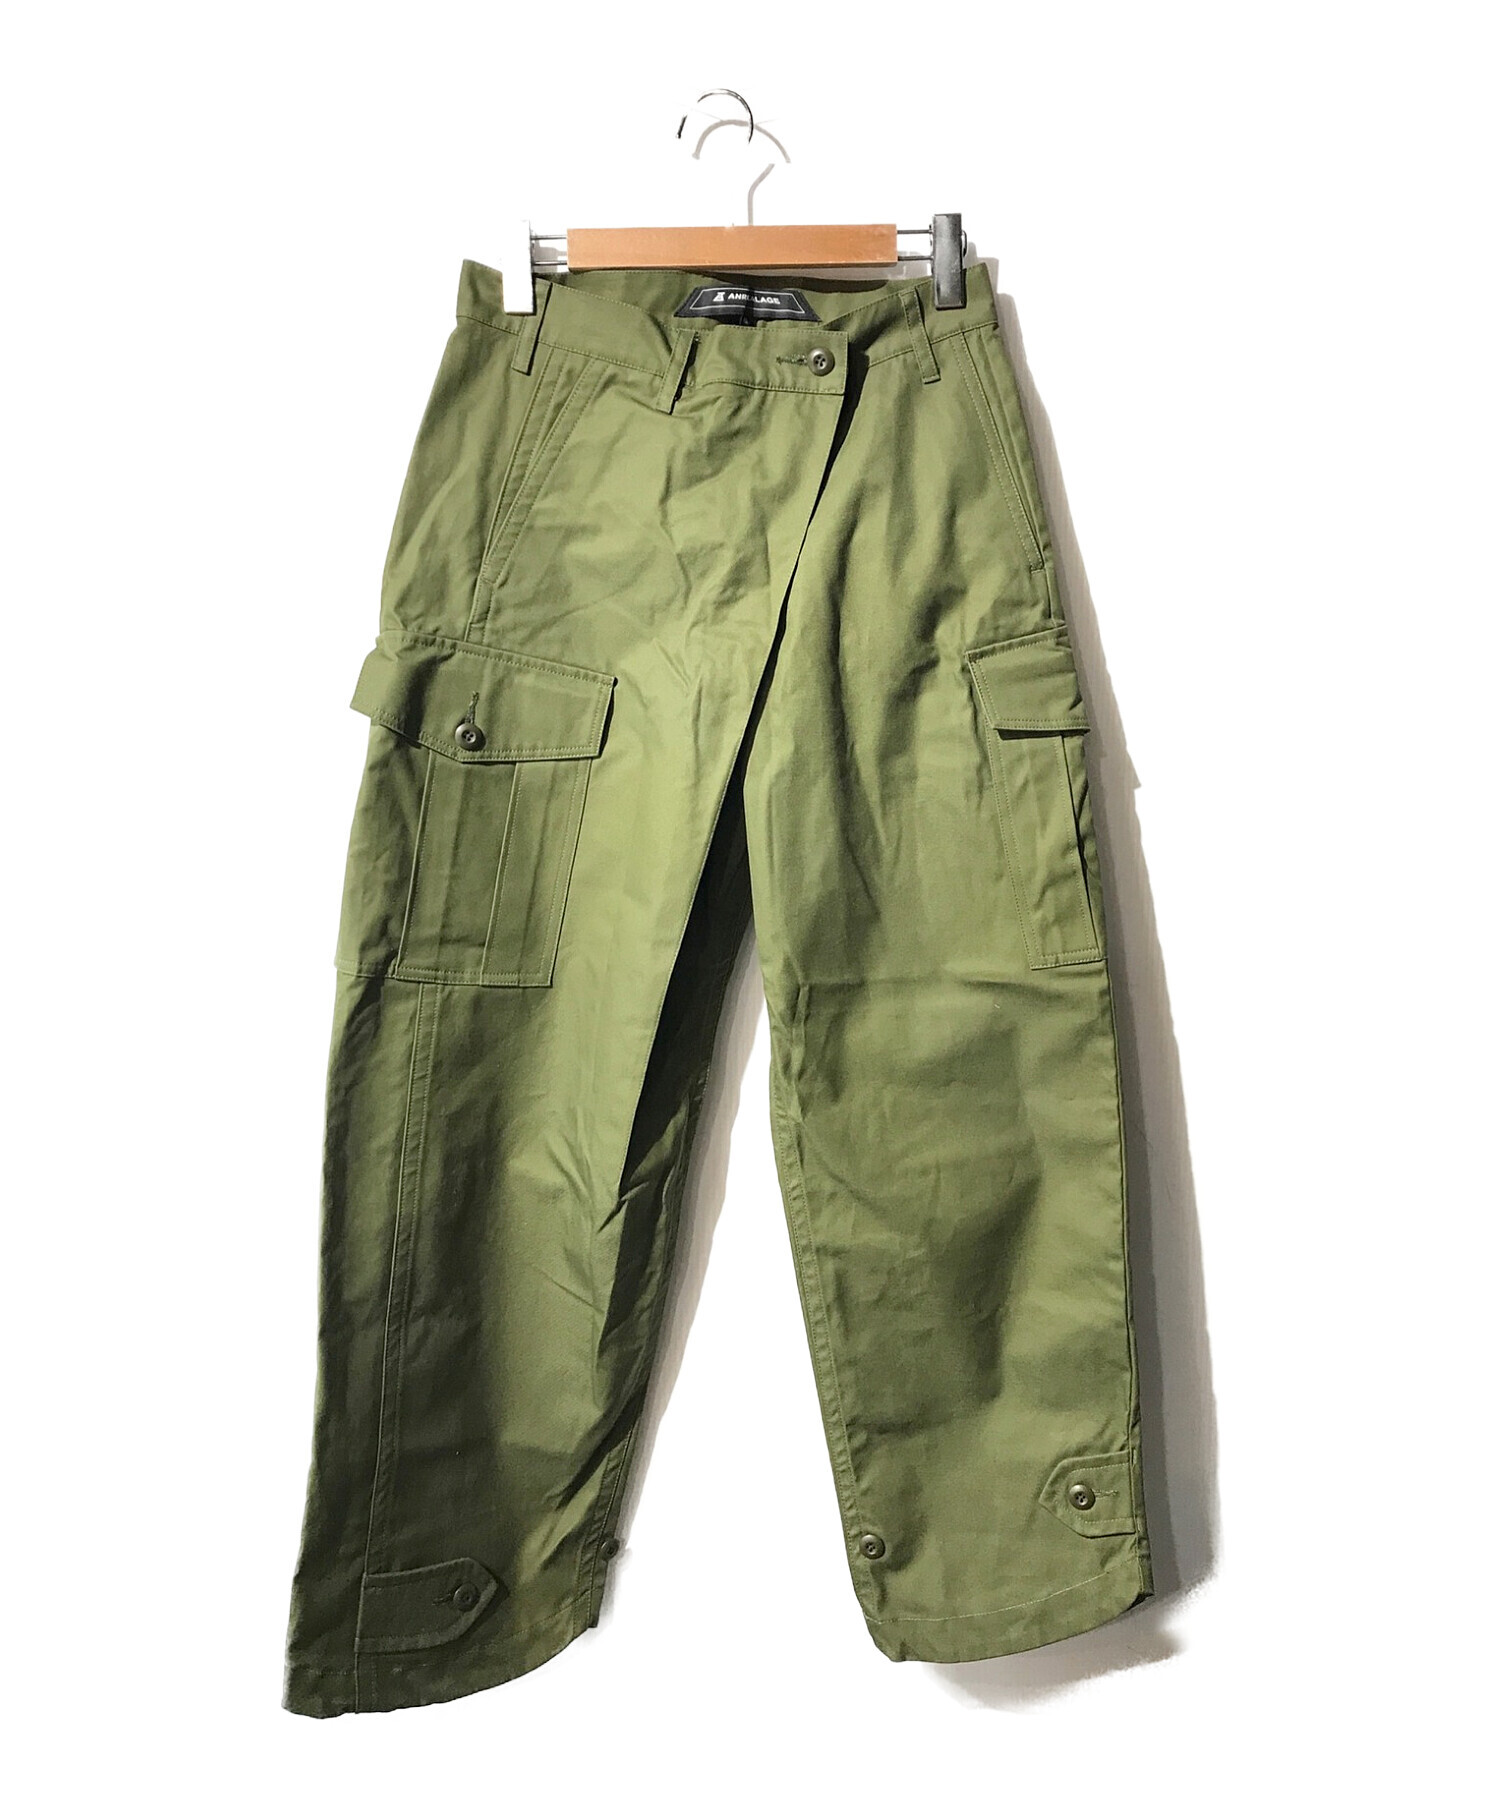 ANREALAGE (アンリアレイジ) side angle military pants カーキ サイズ:46